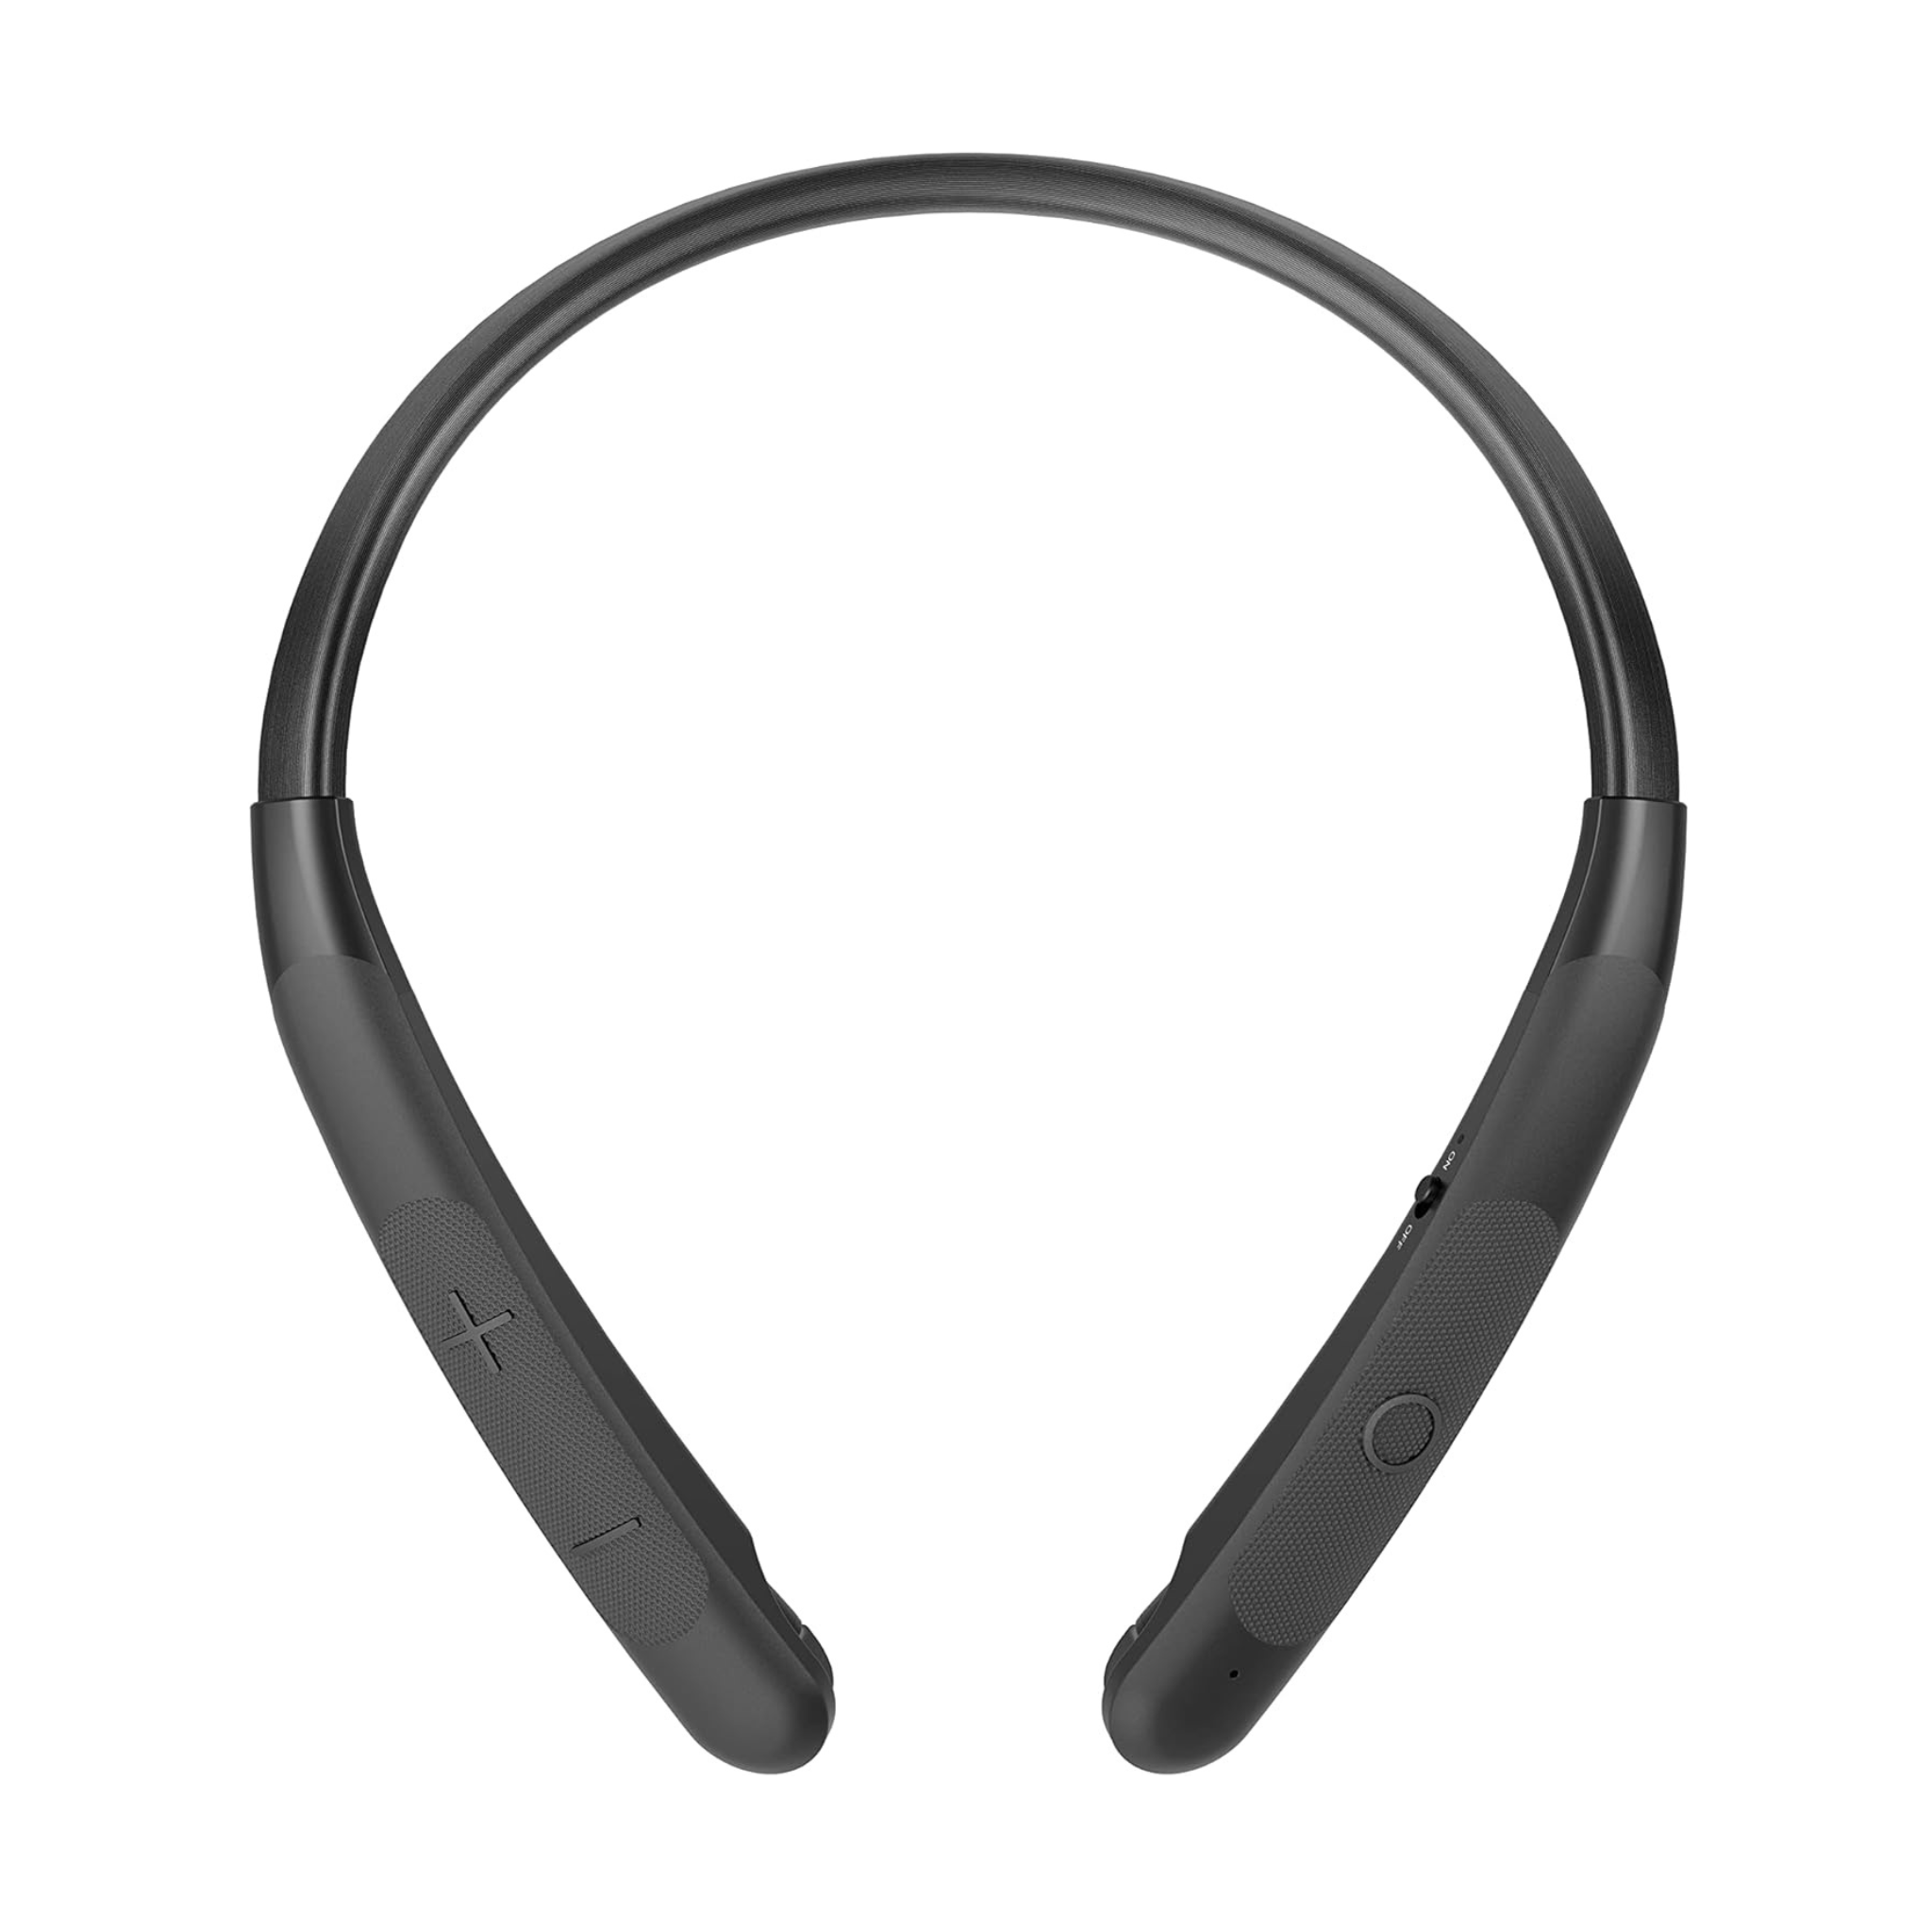 LG Tone Wireless Stereo Headset With Retractable Earbuds